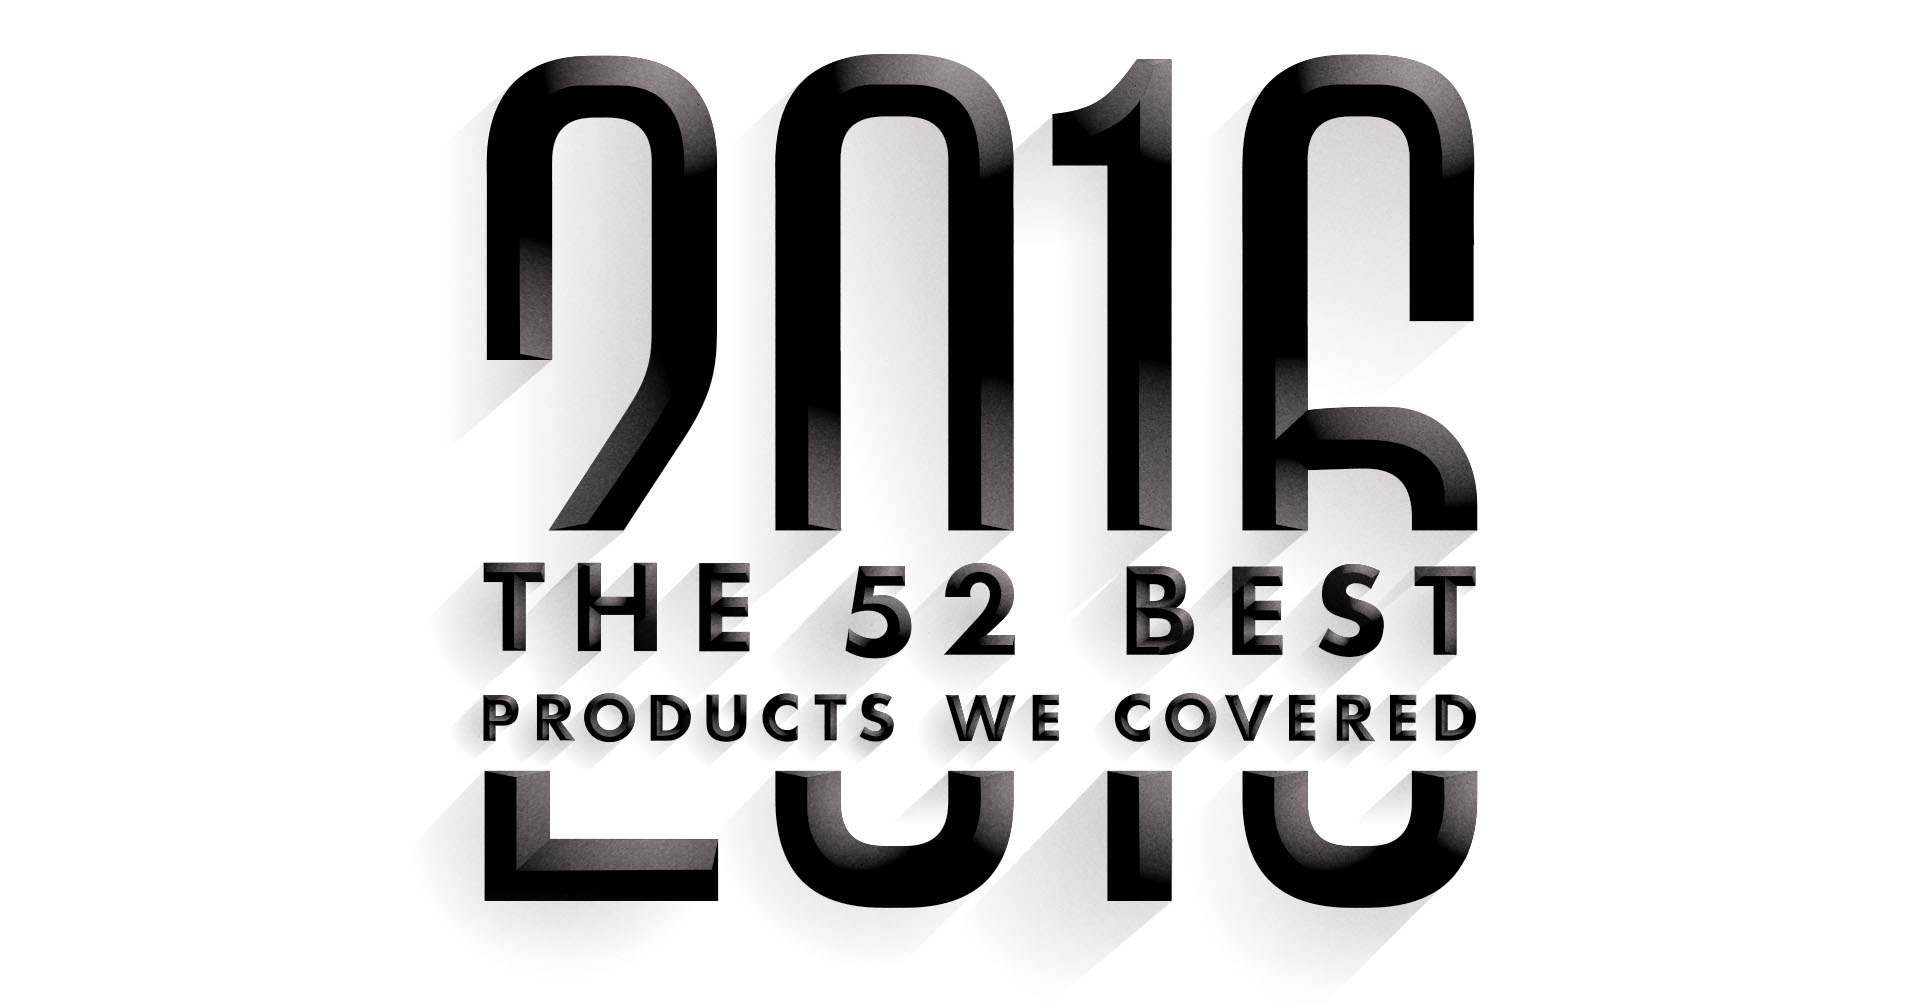 The 52 Best Products We Covered in 2016